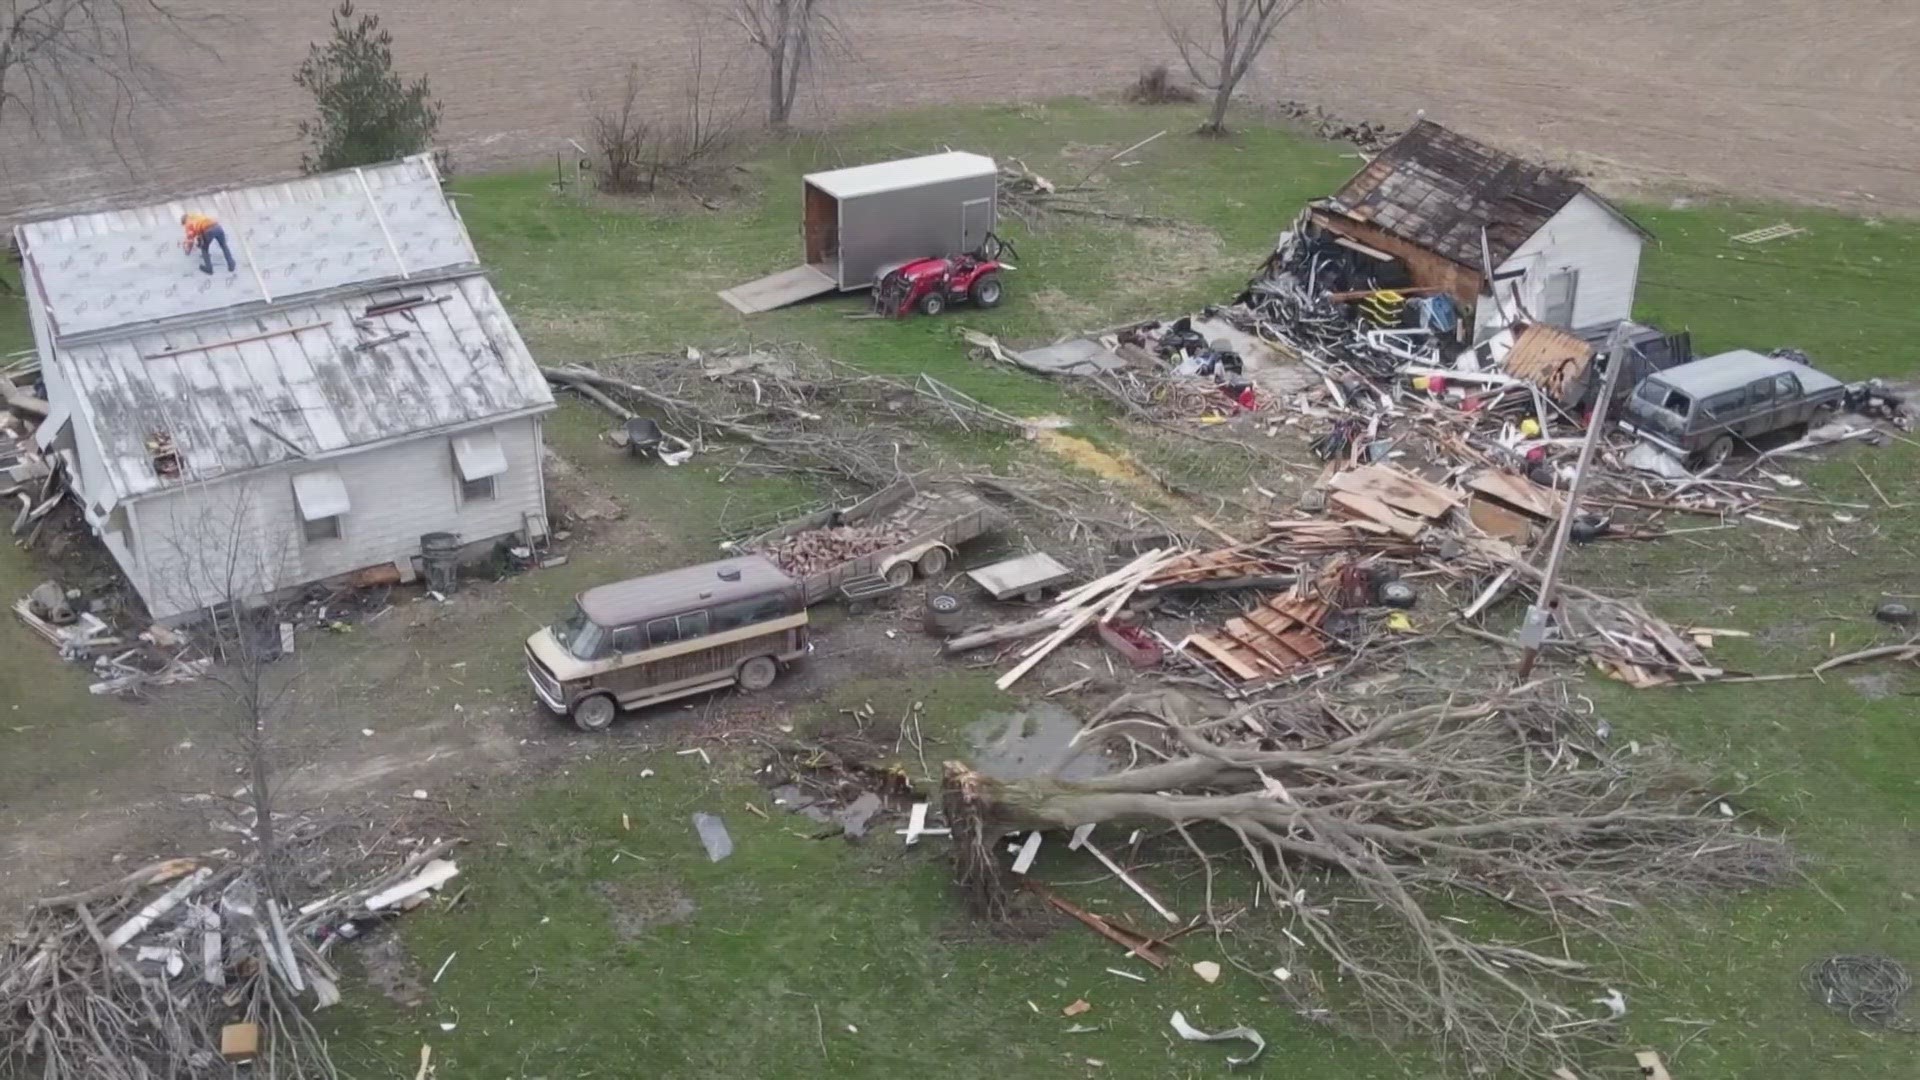 Cleanup efforts are continuing in Richland County one week after an EF2 tornado ripped through the area. 3News' Kaitor Kay and Betsy Kling report.